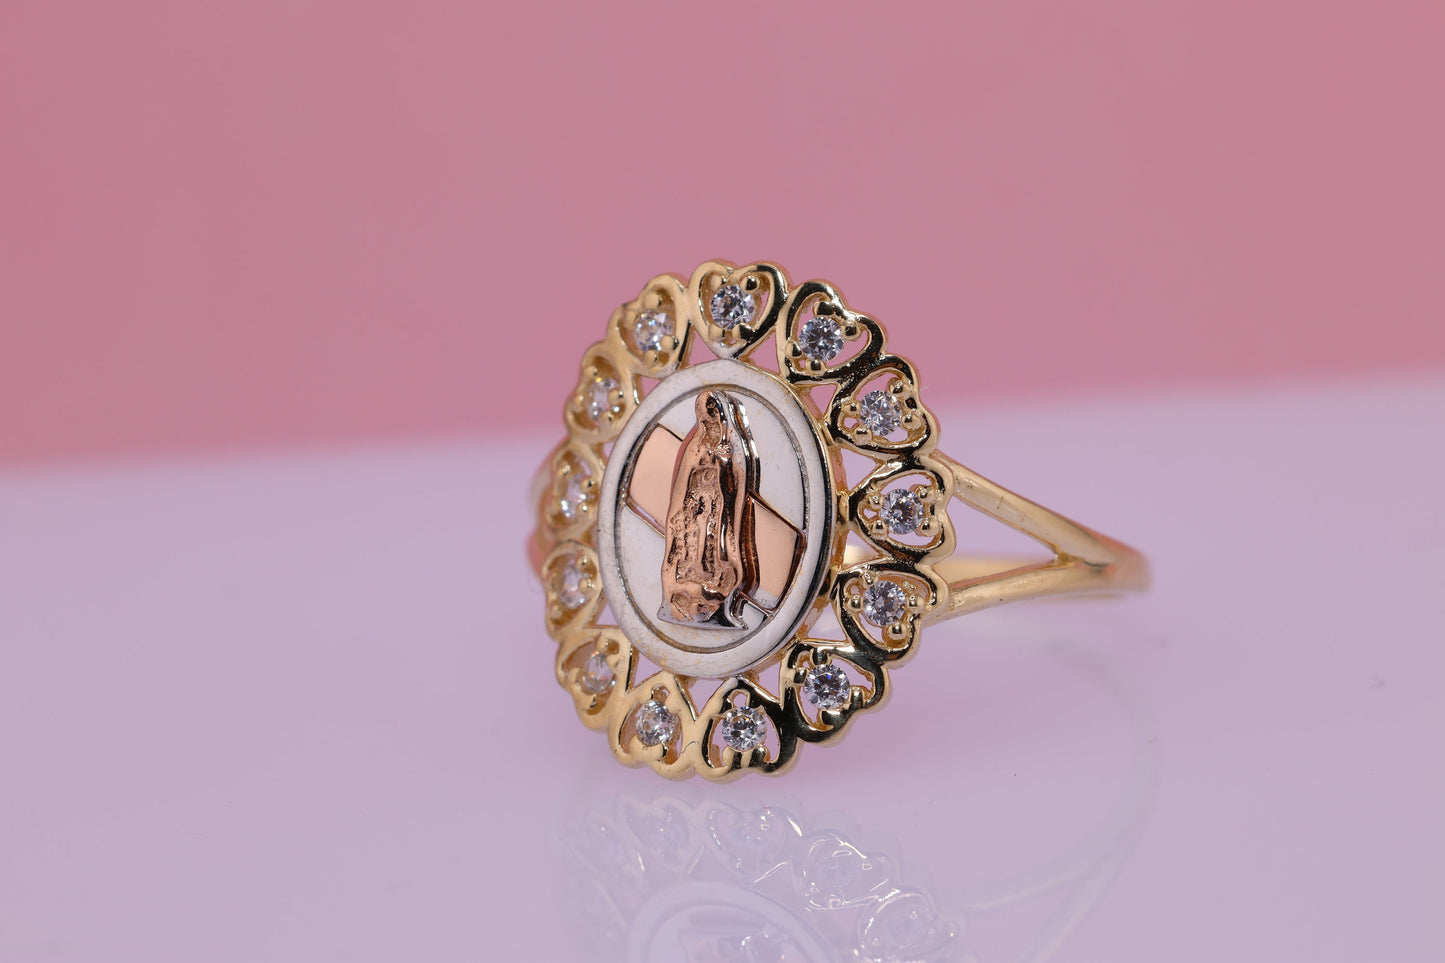 14k Solid Gold Virgin Mary Virgen Maria Lady Guadalupe Ring GG